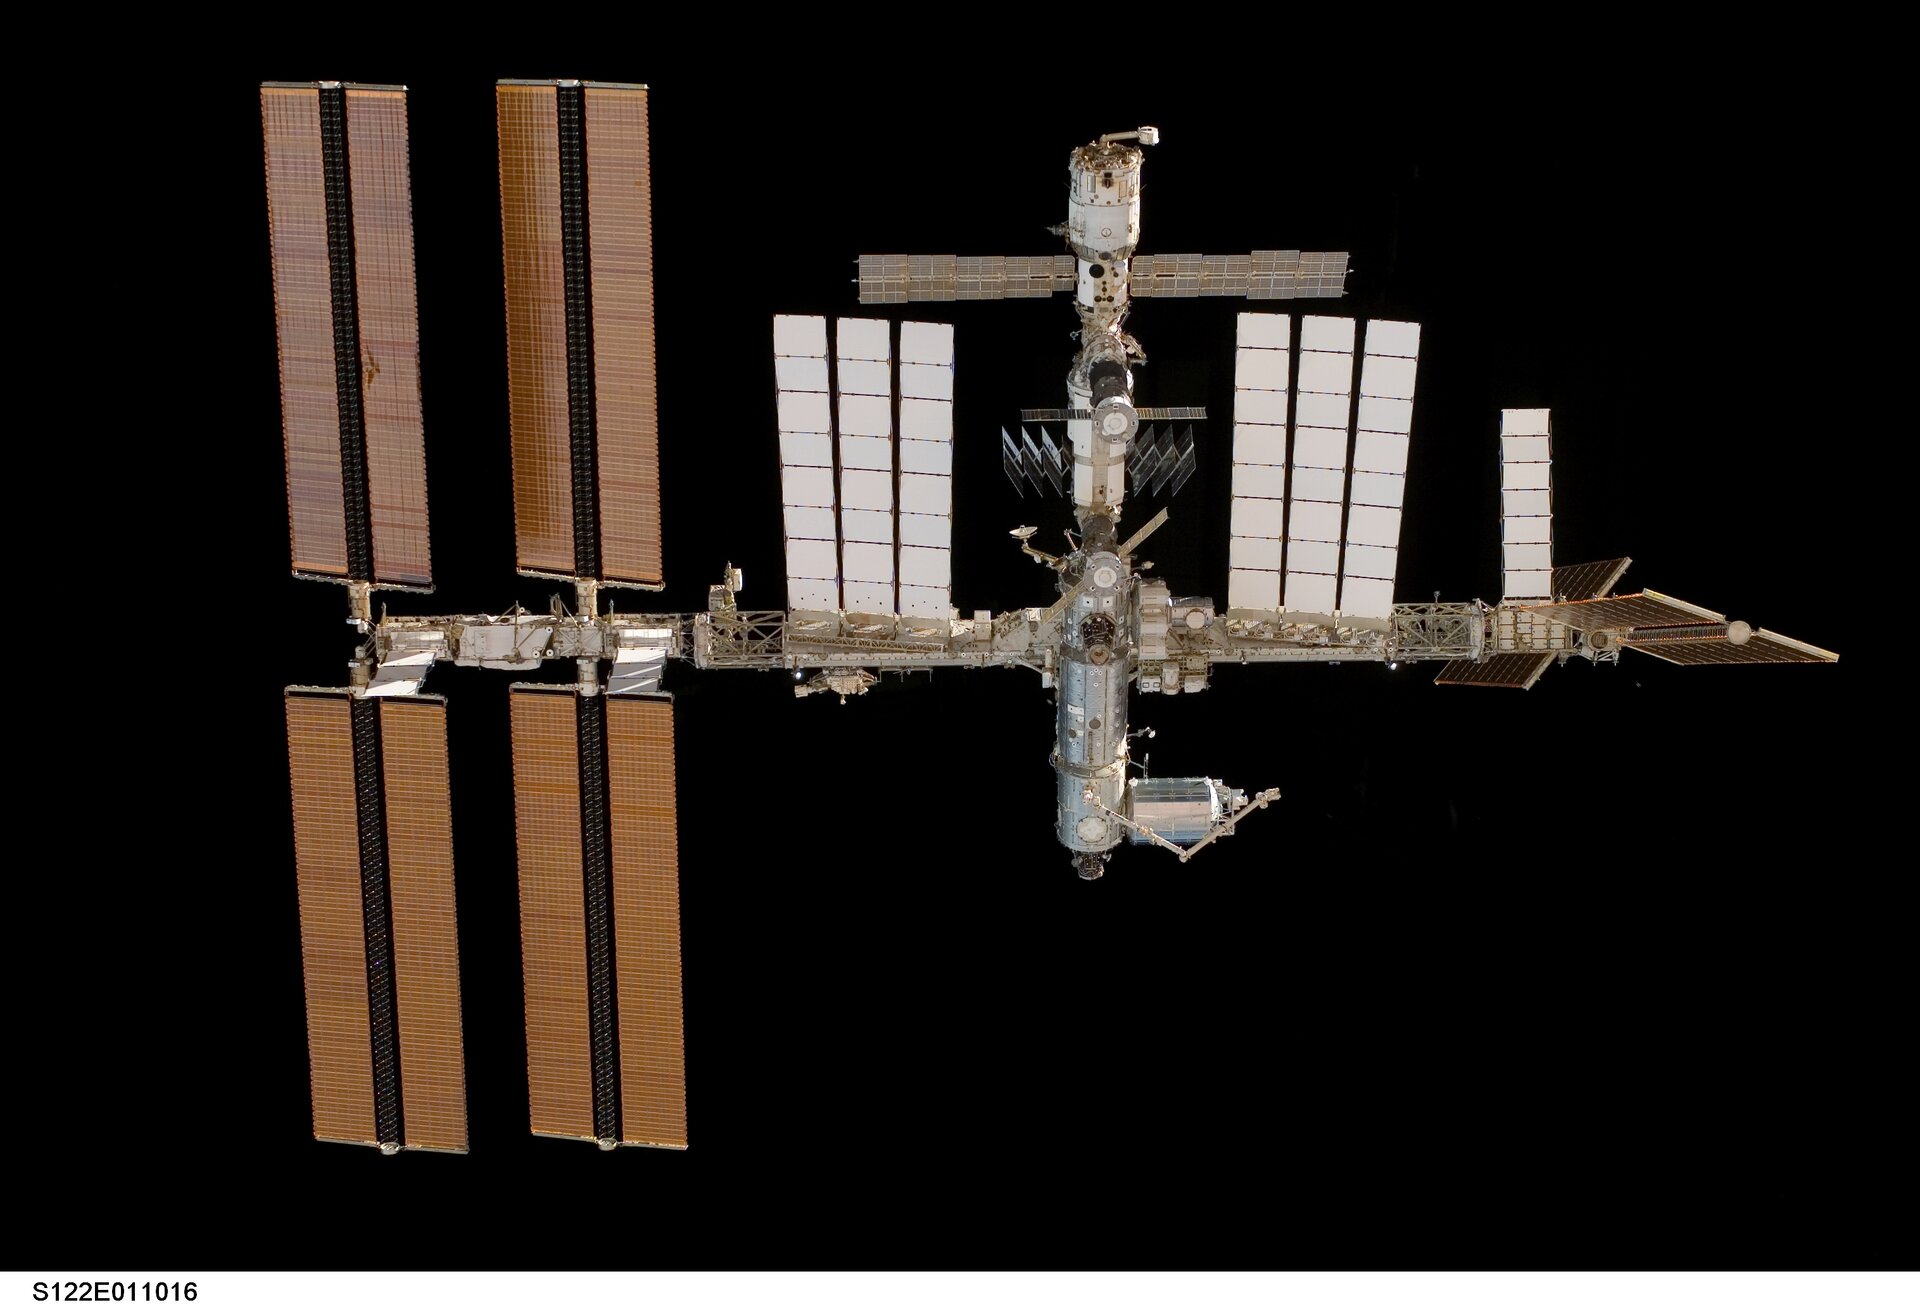 ISS with Columbus